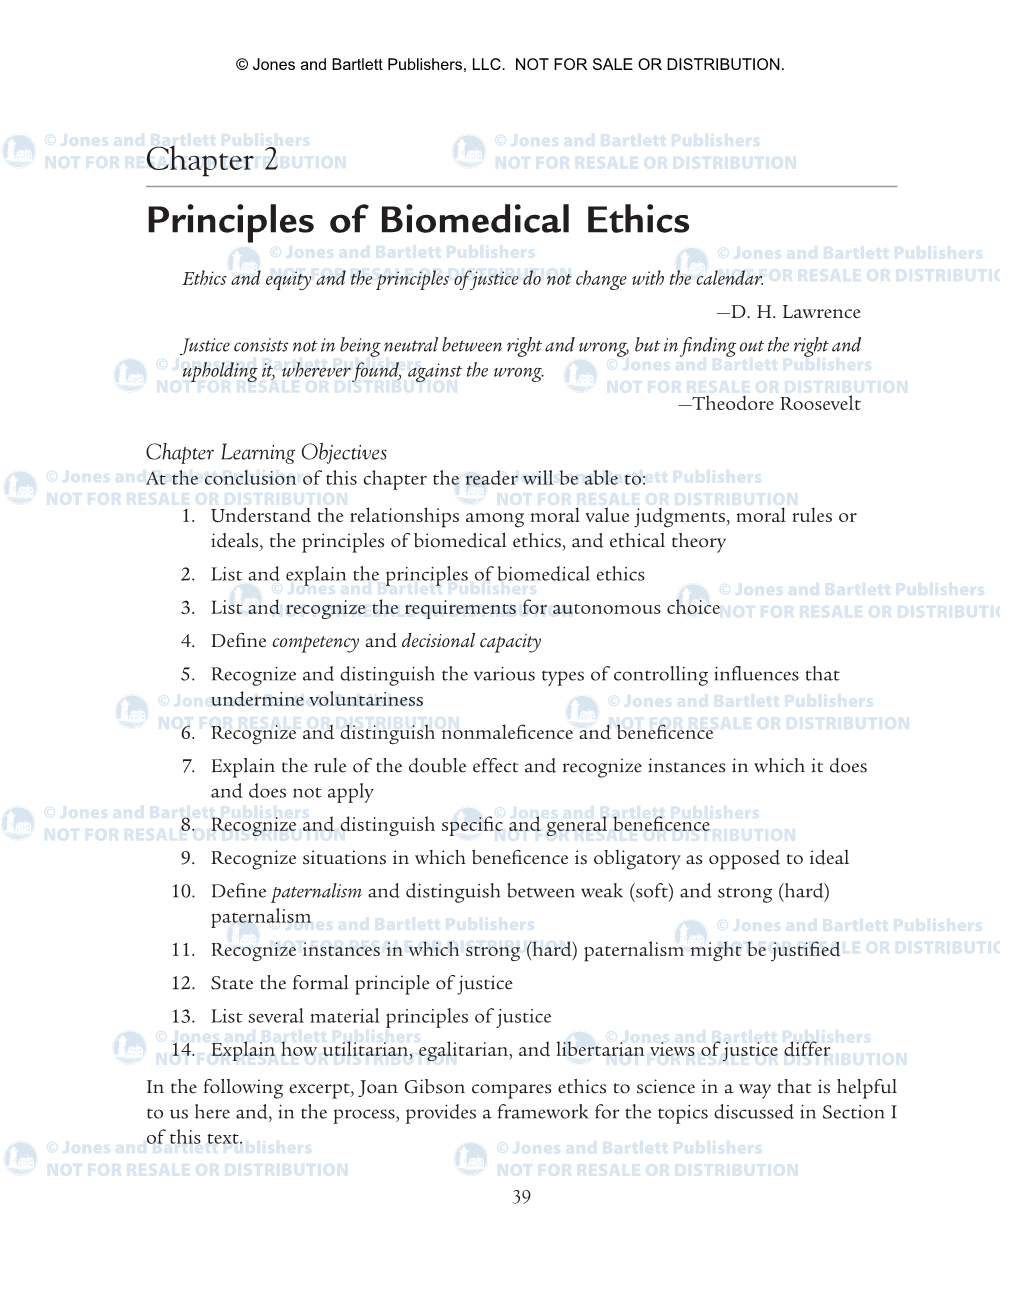 Chapter 2 Principles of Biomedical Ethics